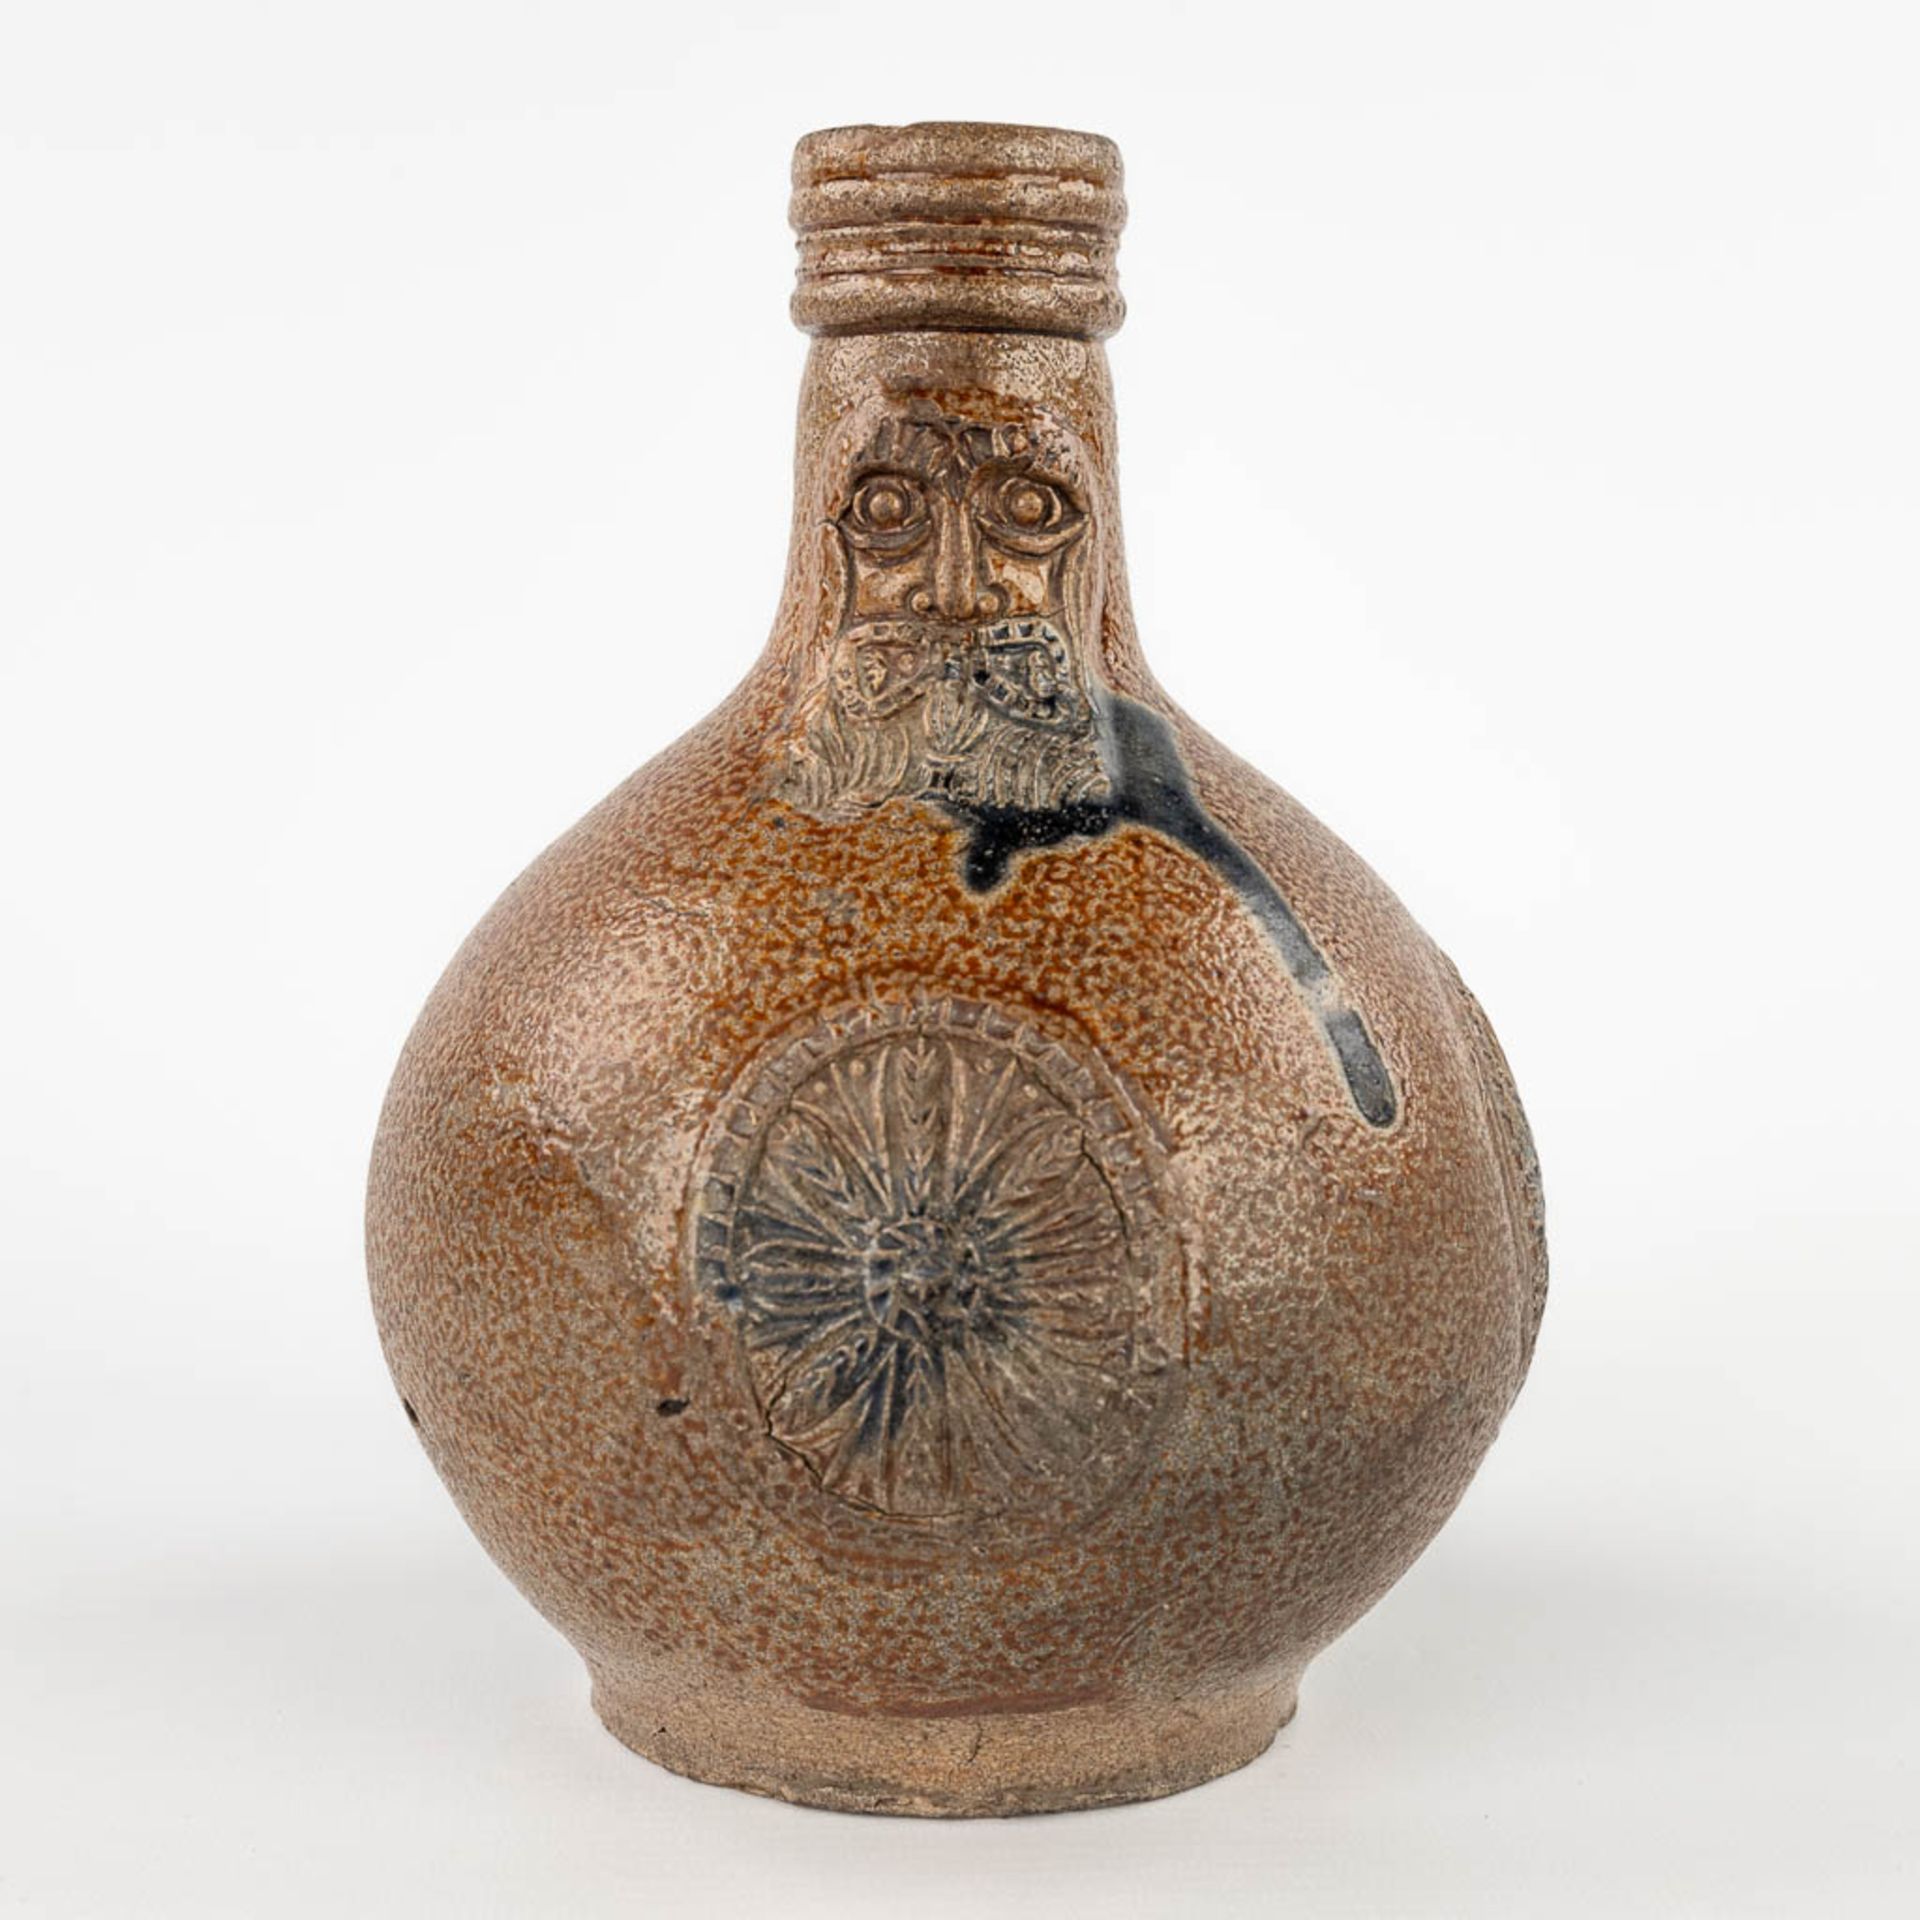 An antique Bartmann jug with 3 cartouches, 17th C. (H:20 x D:14,5 cm) - Image 4 of 14